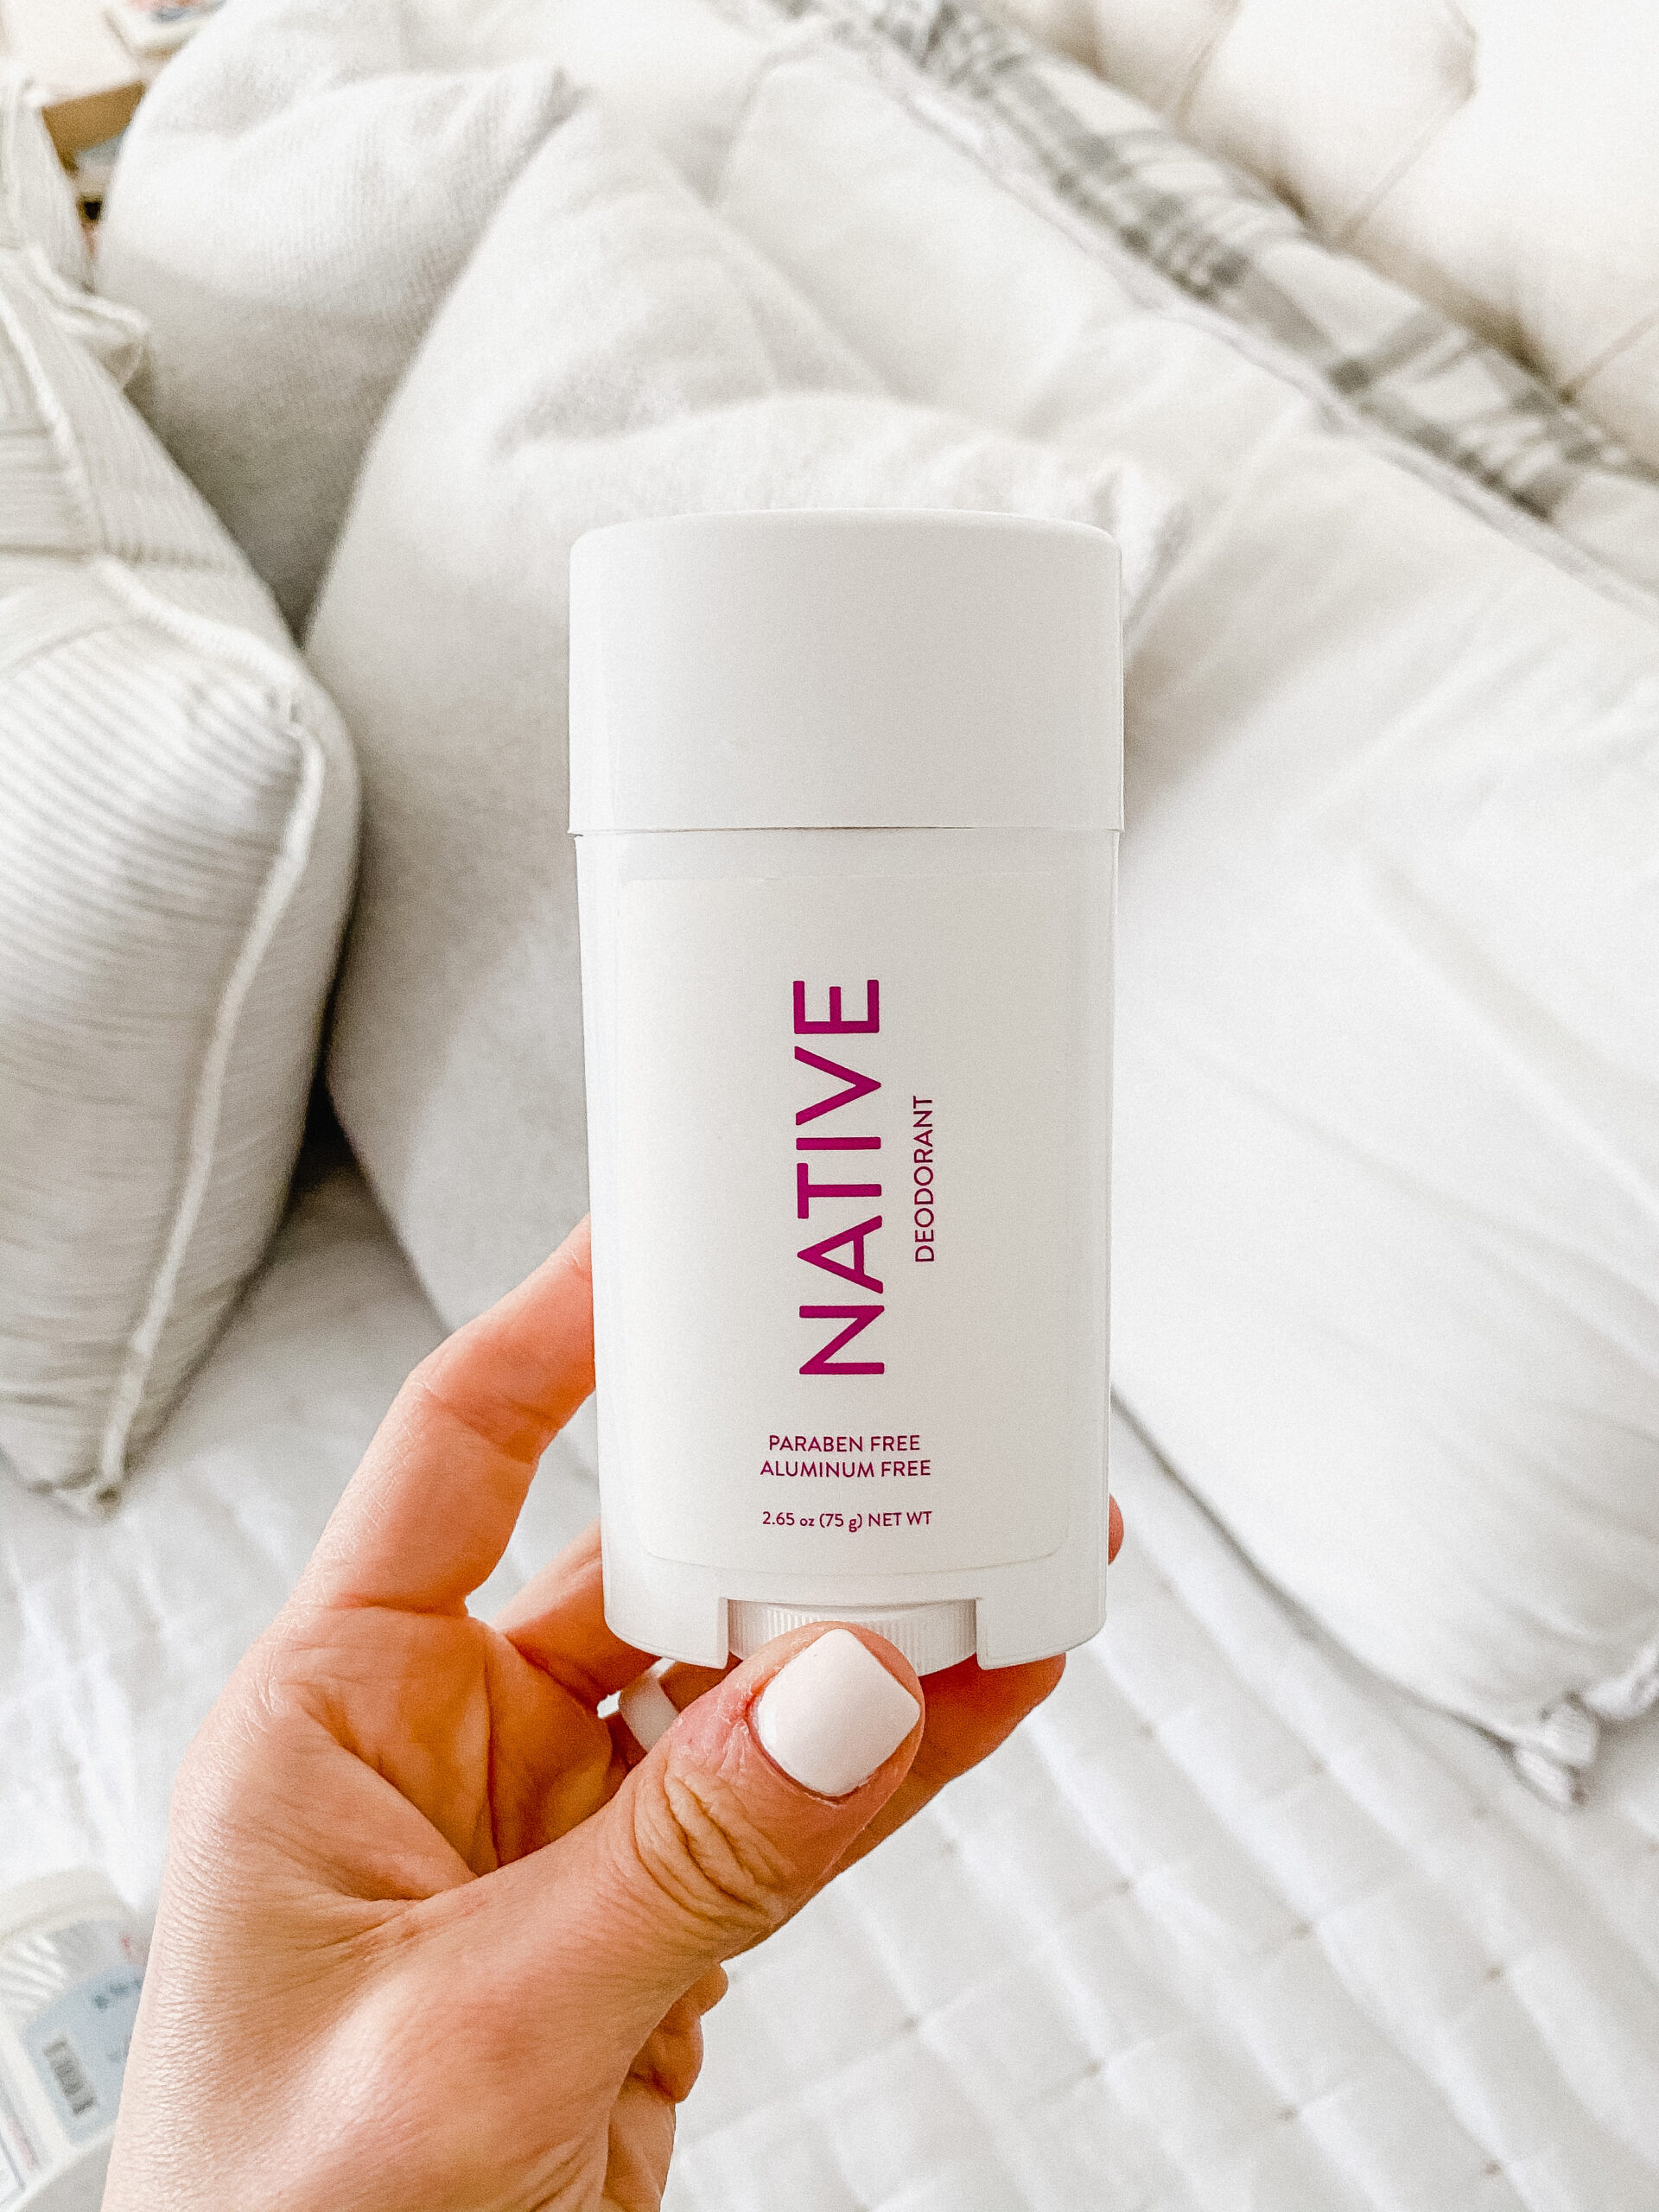 Connecticut life and style blogger Lauren McBride shares her current favorite body products including body lotion, self tanner, and more.